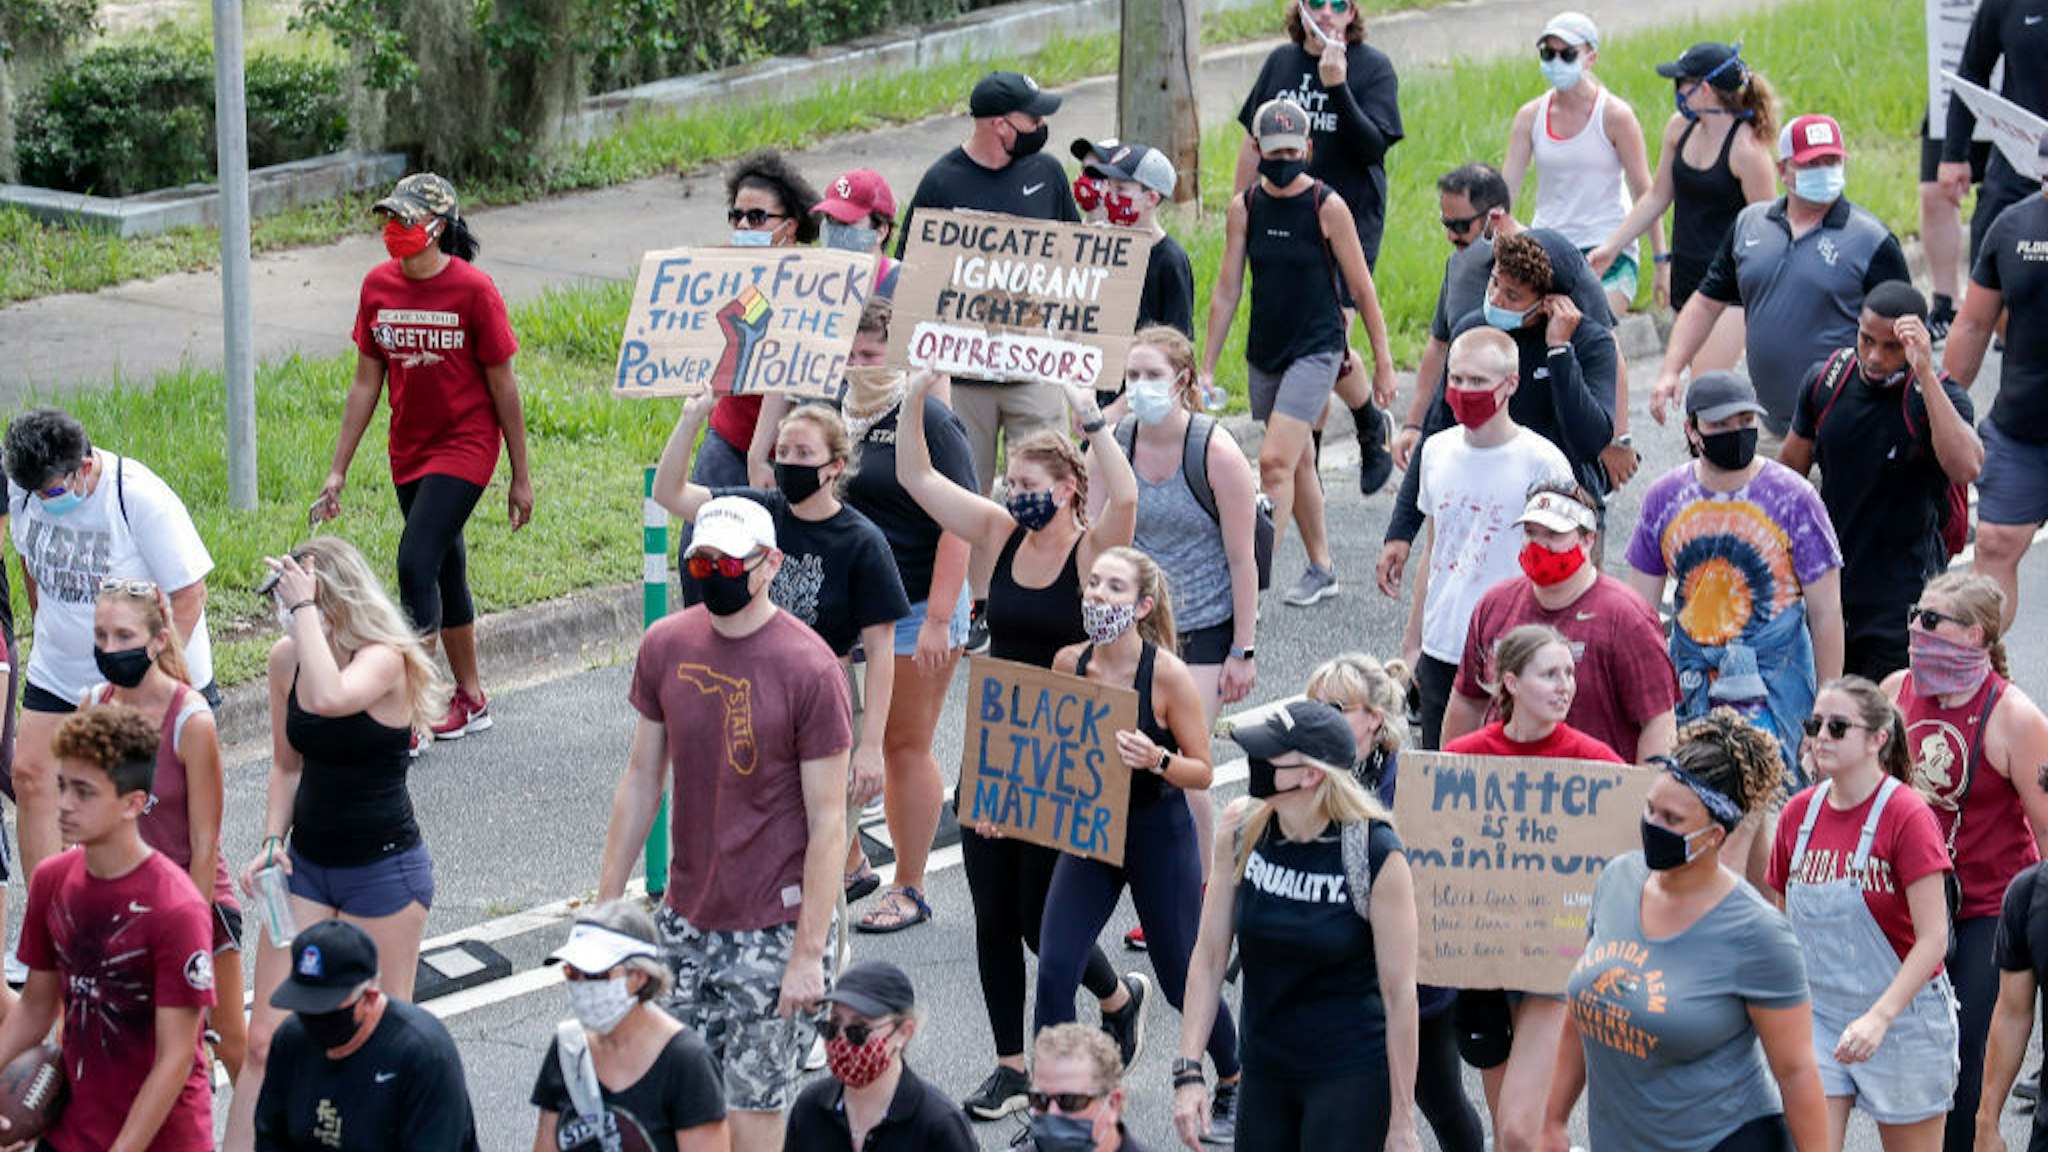 TALLAHASSEE, FL - JUNE 13: The Florida State Football Team lead a large group of supporters during a player-led unity walk from Doak Campbell Stadium on the campus of Florida State University to the state capital building on June 13, 2020 in Tallahassee, Florida. (Photo by Don Juan Moore/Getty Images) *** Local Caption *** Florida State Football Team